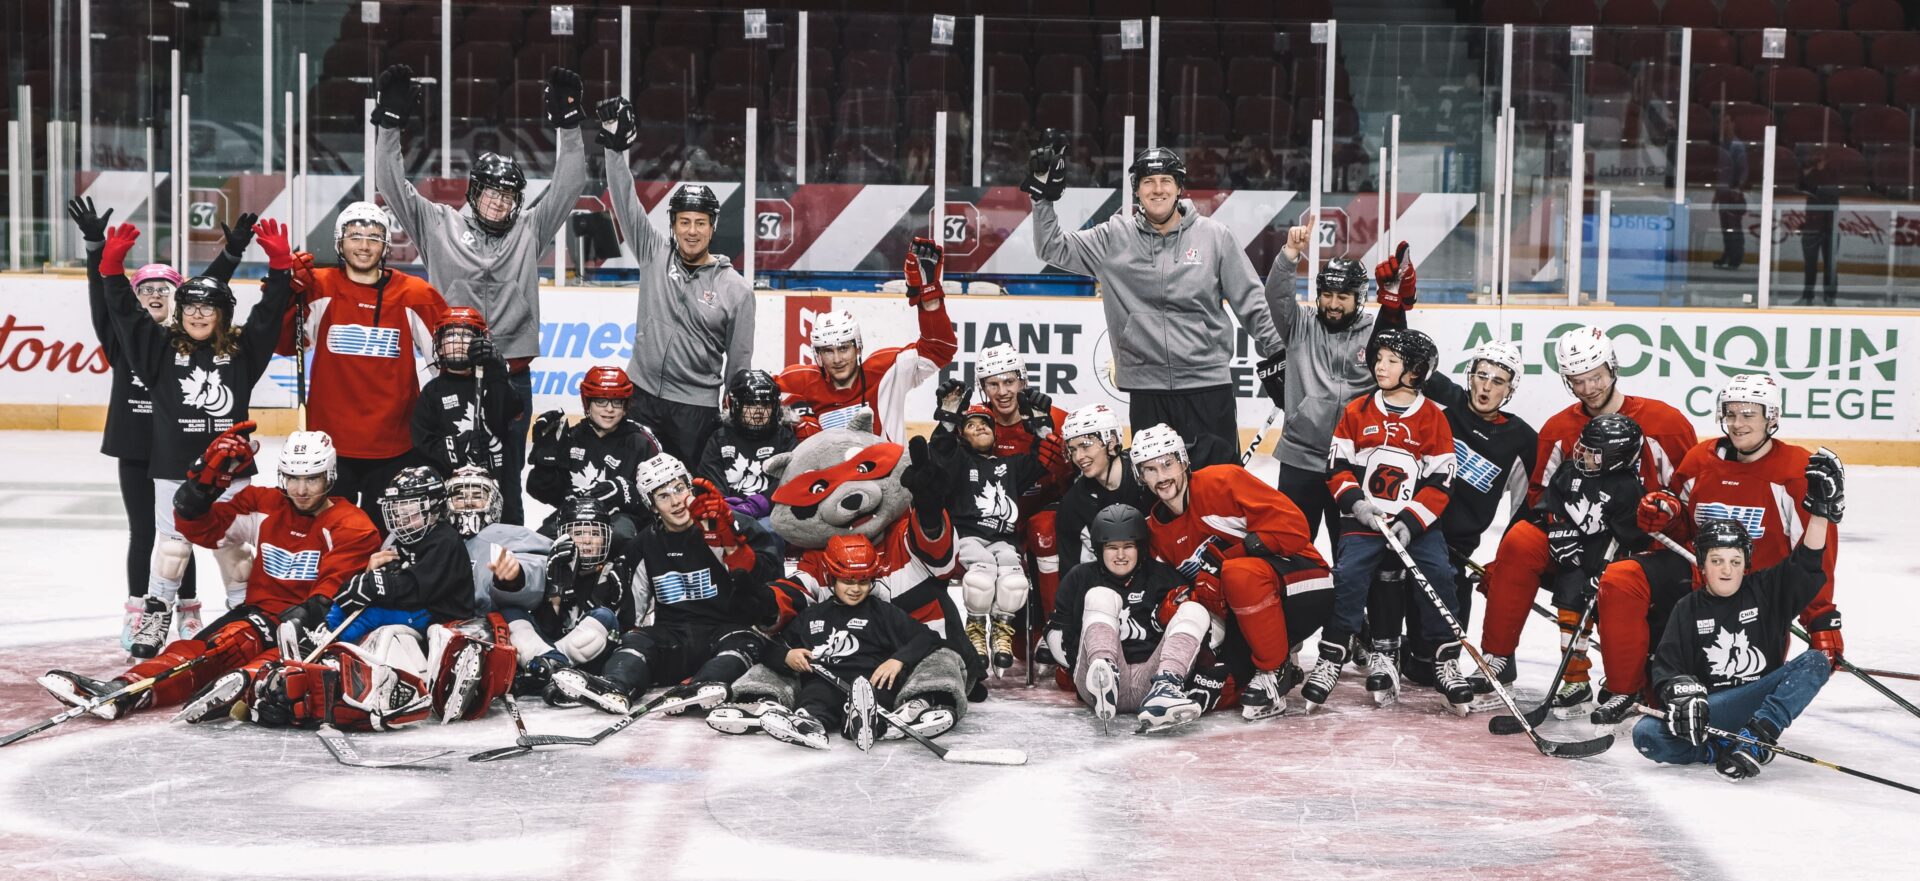 young hockey players posing with 67's players in a group team shot on the ice